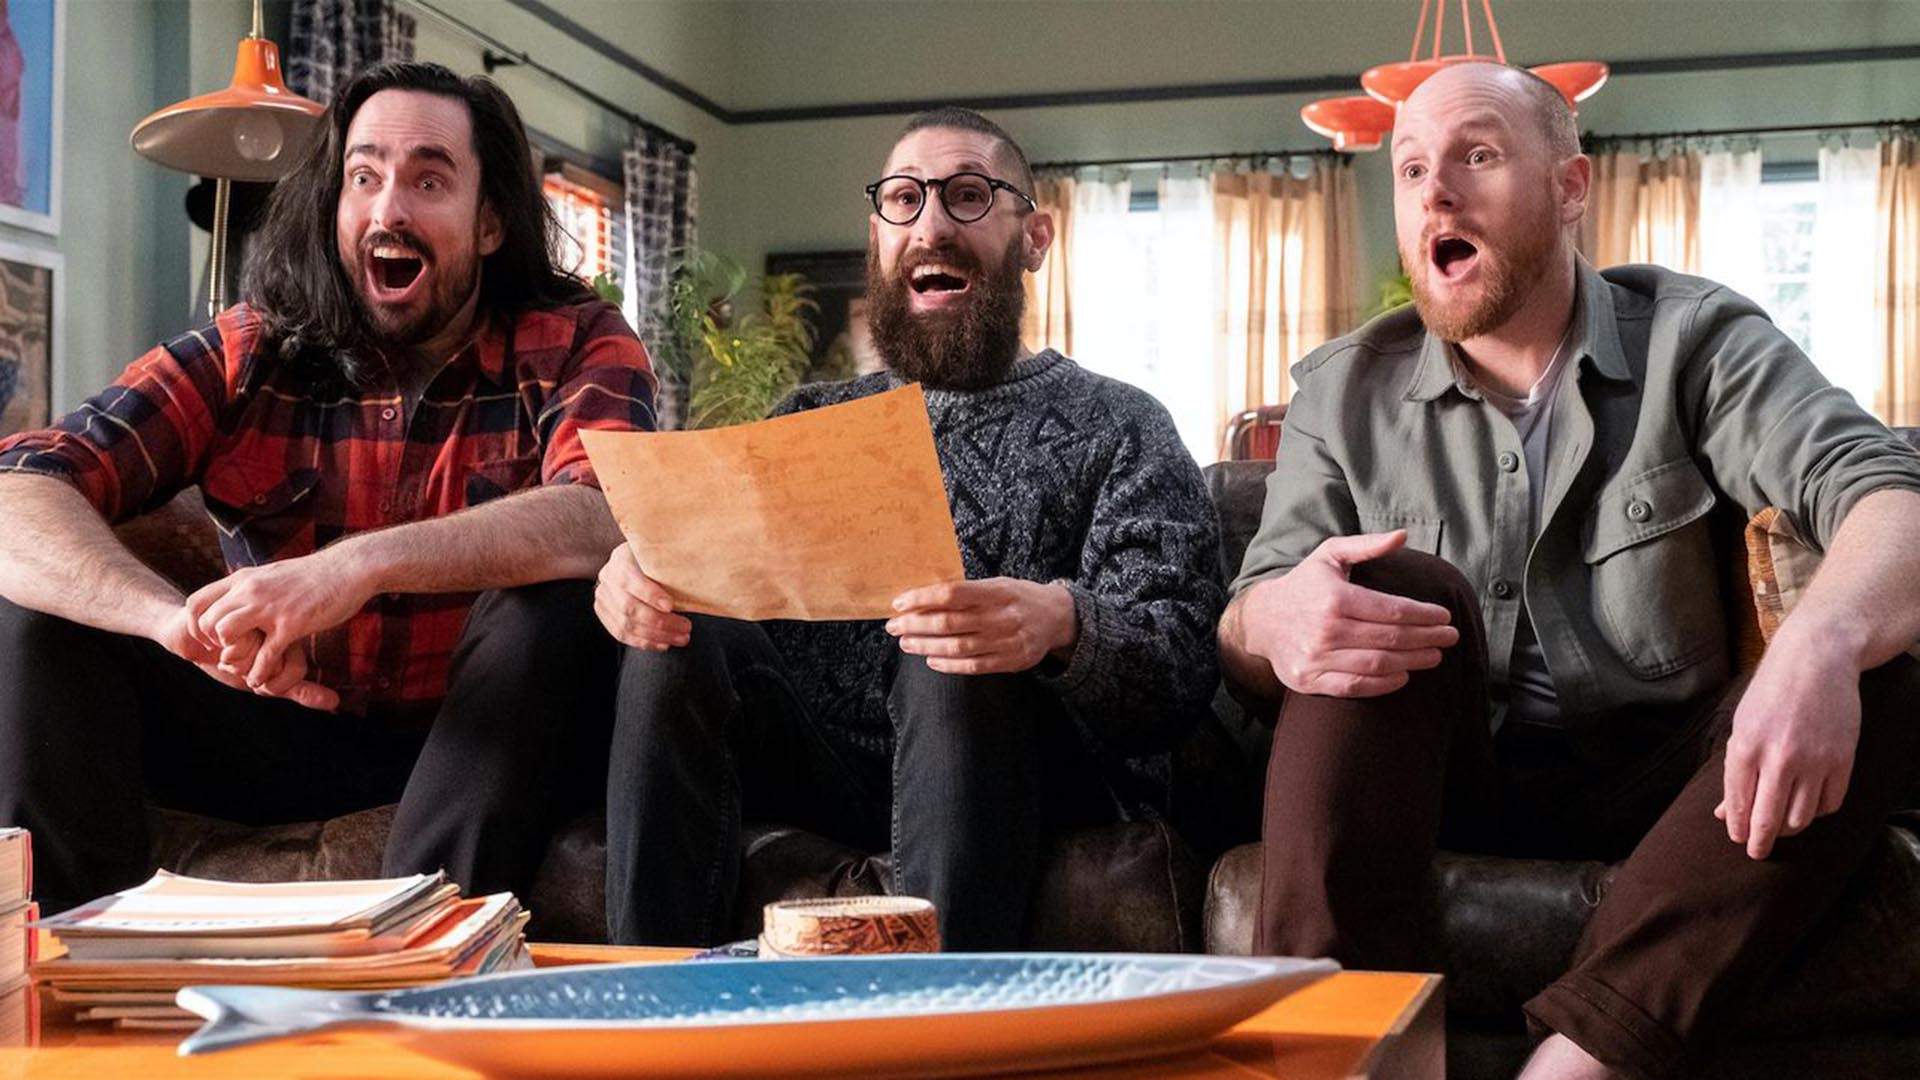 'Aunty Donna's Big Ol' House of Fun' Is the Side-Splitting Absurdist Comedy Gem This Hectic Year Needs